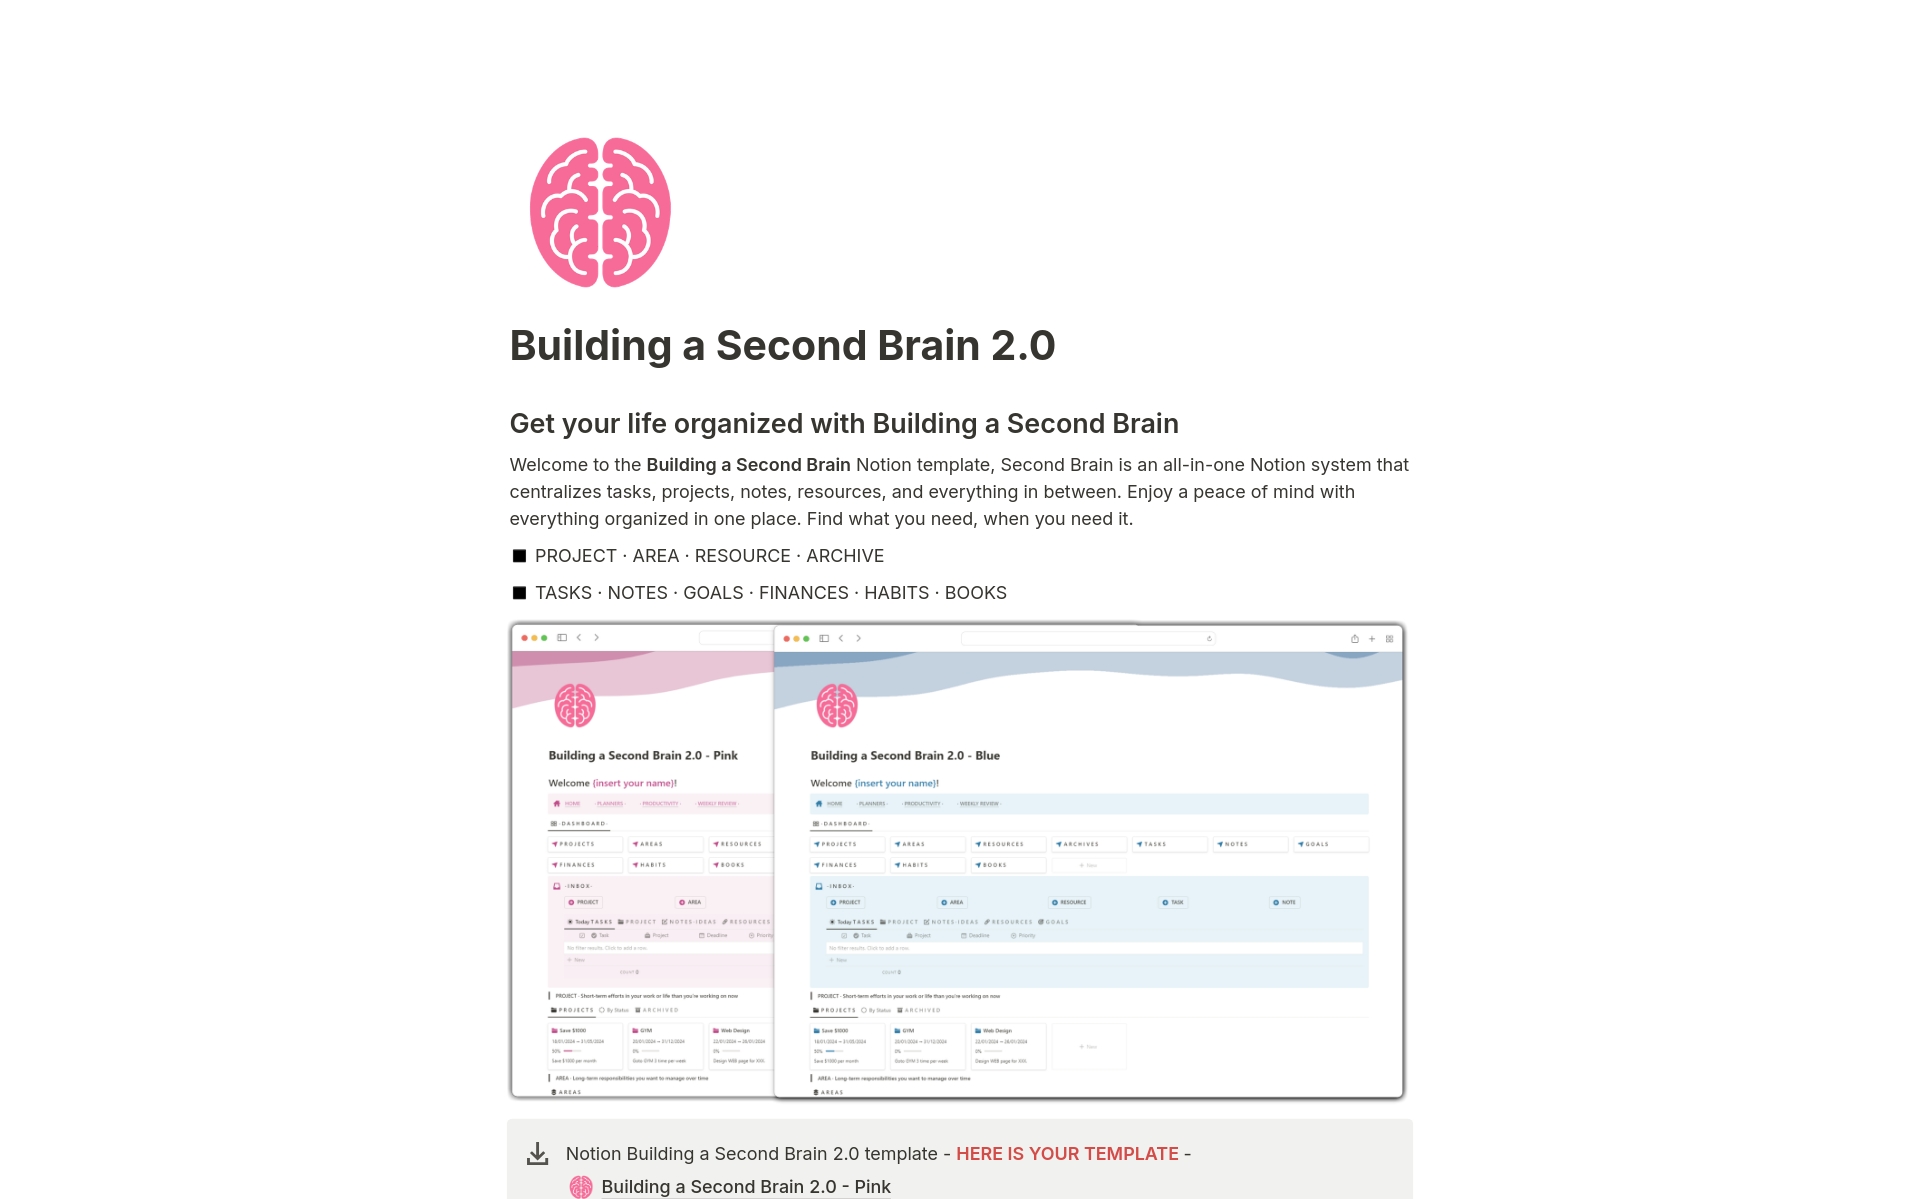 Get your life organized with Second Brain

Second Brain is an all-in-one Notion system that centralizes tasks, projects, notes, resources, and everything in between.